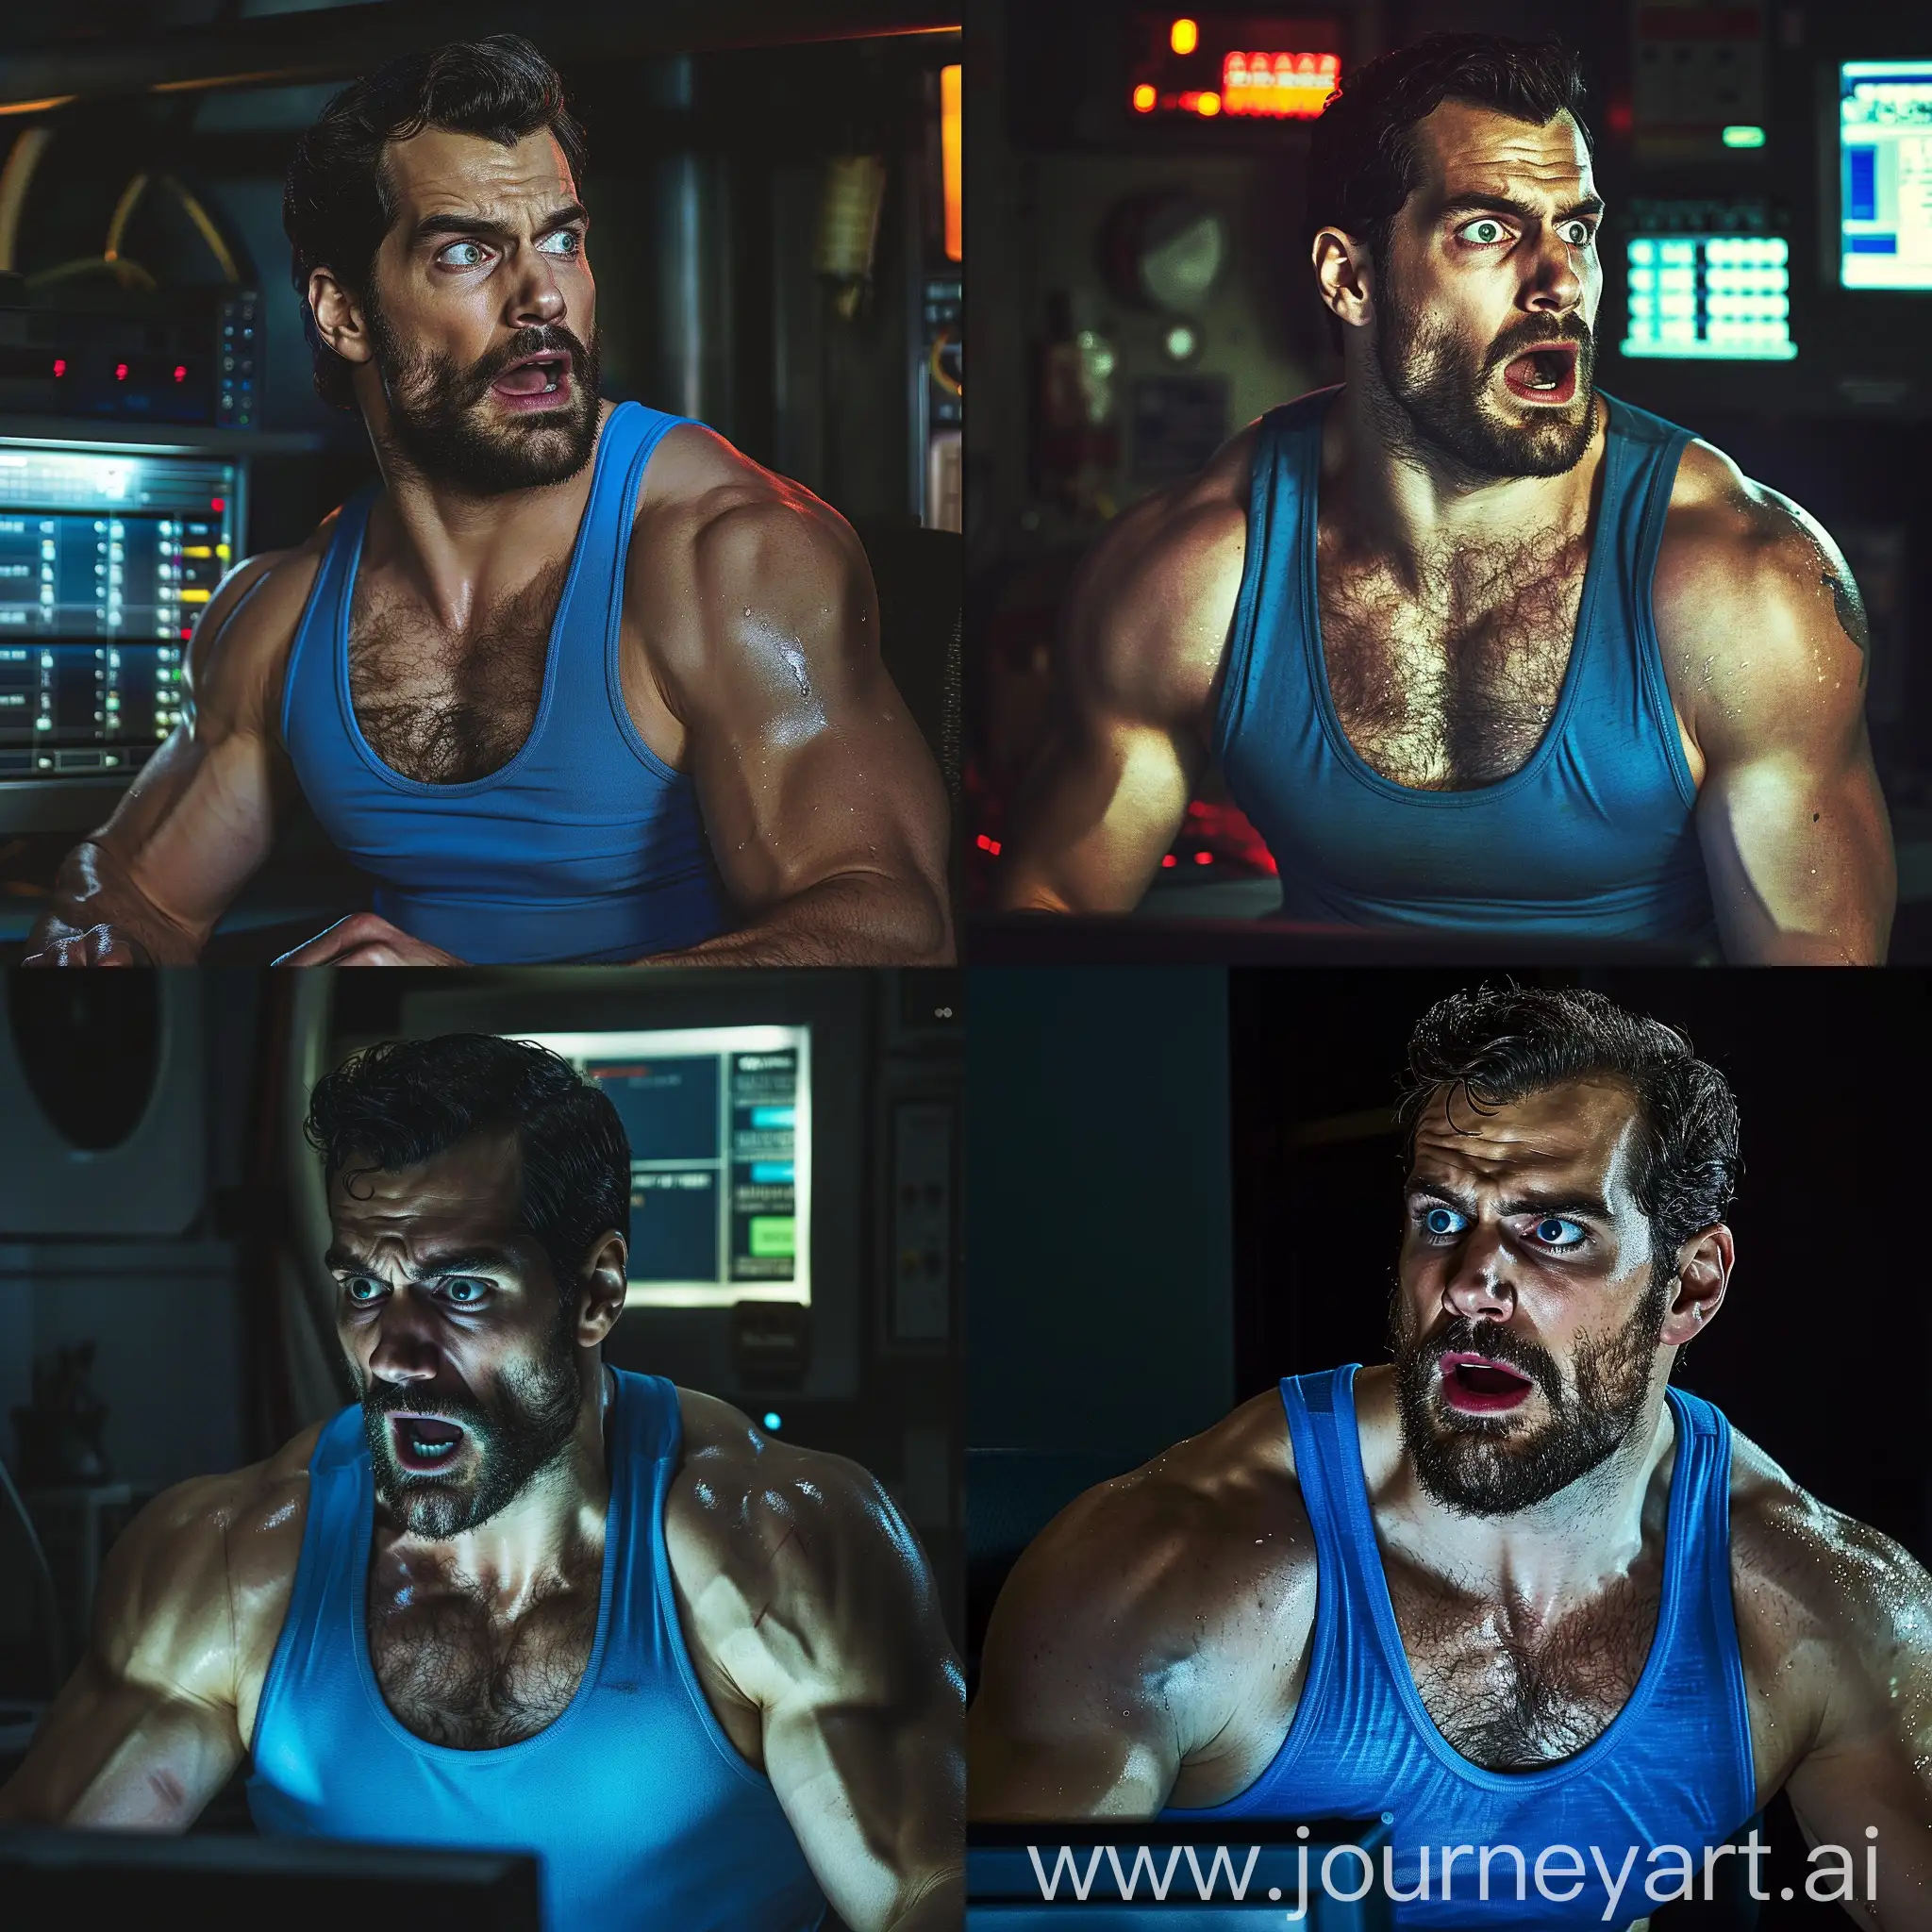 A photo of Good looking Henry Cavill wearing a blue tank top, sitting in front of a computer screen, burly muscular body, glistening skin, hairy pecs, hairy manly chest, handsome bearded Henry Cavill face, with a shocked surprised face expression, with his mouth agape, eyes white and blank, staring at the bright screen, dark room background with lights turned off, cinematic lighting